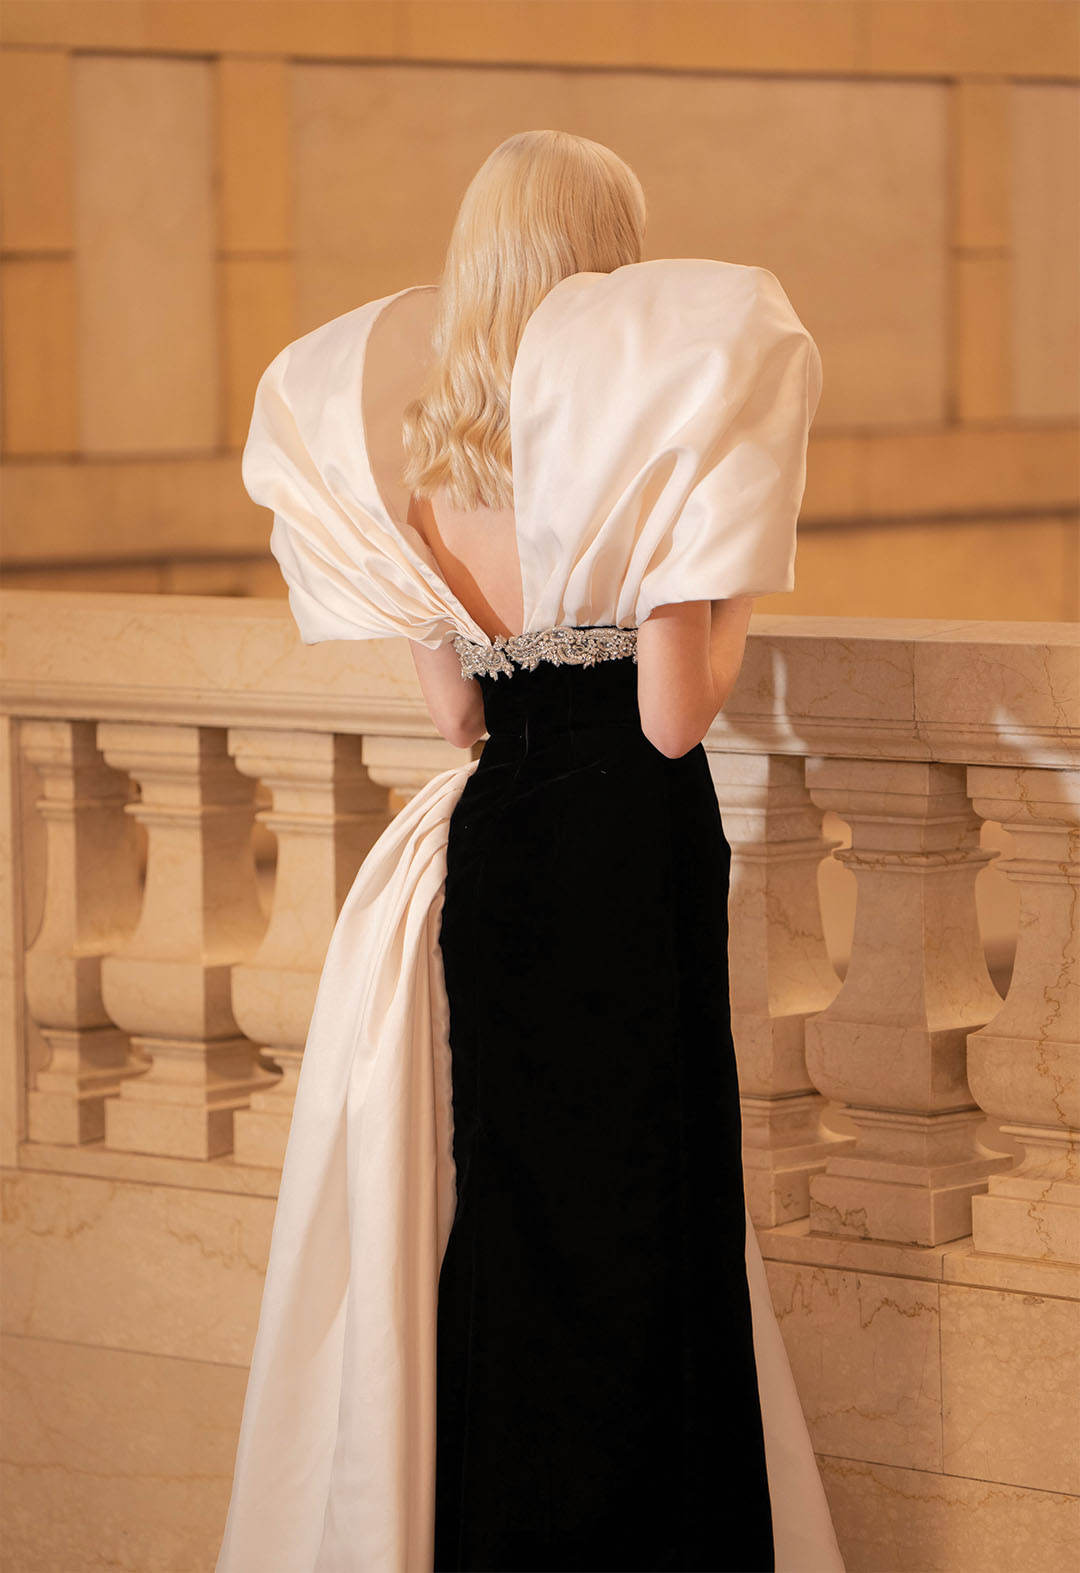 This image is the back of the dress. Unlike the front part, it boldly shows the back of the model to show the beauty of the reversal. The crystal decoration extends to the back, showing a couture aspect.